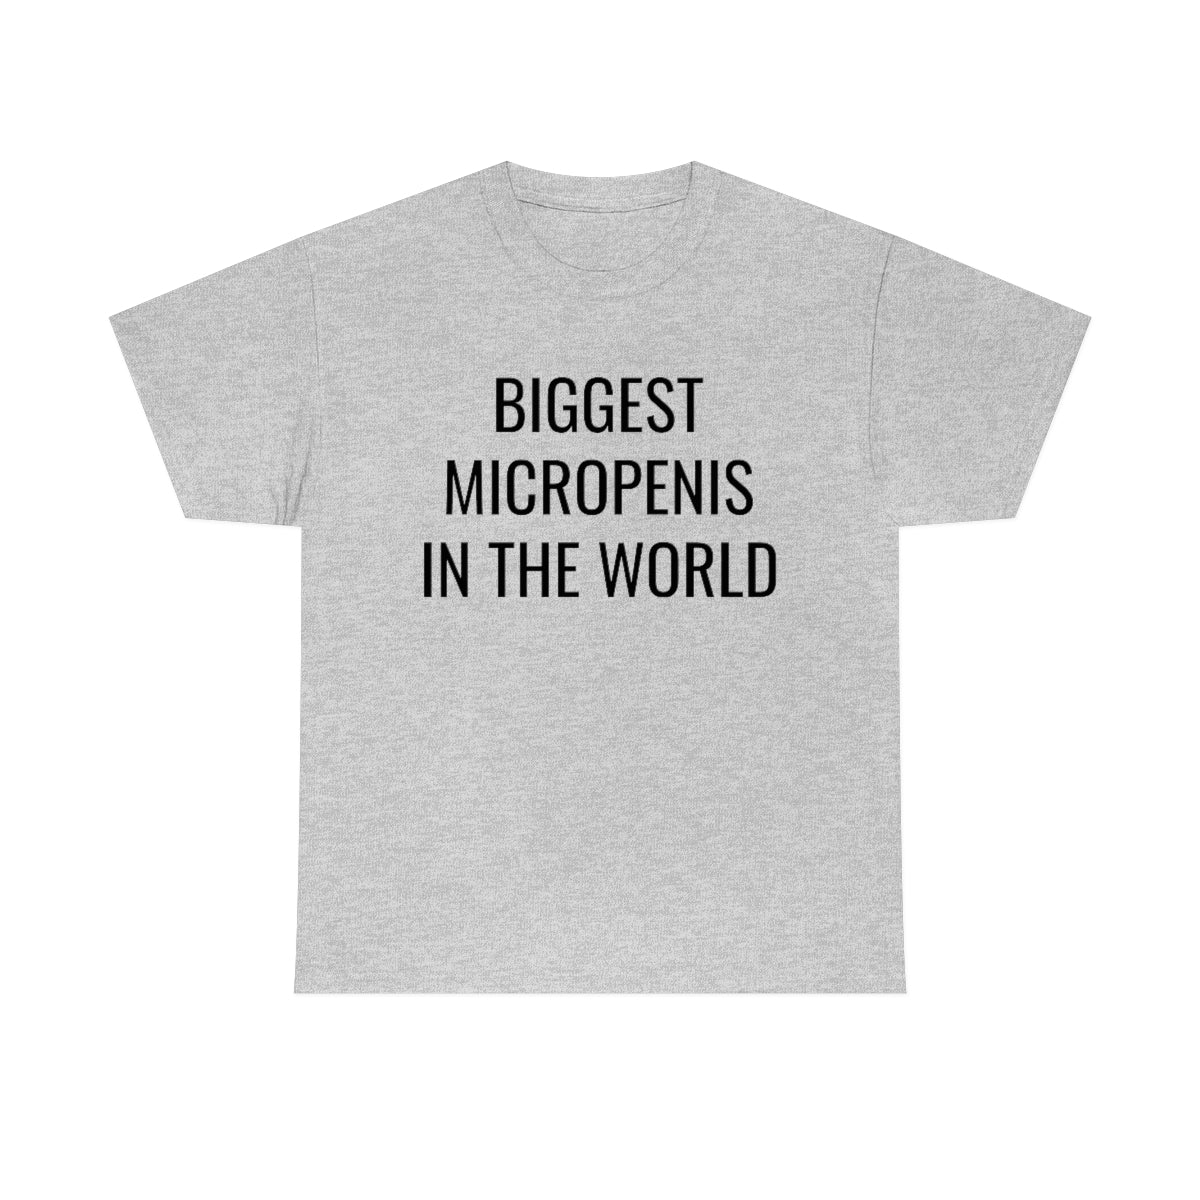 MICROPENIS T-SHIRT